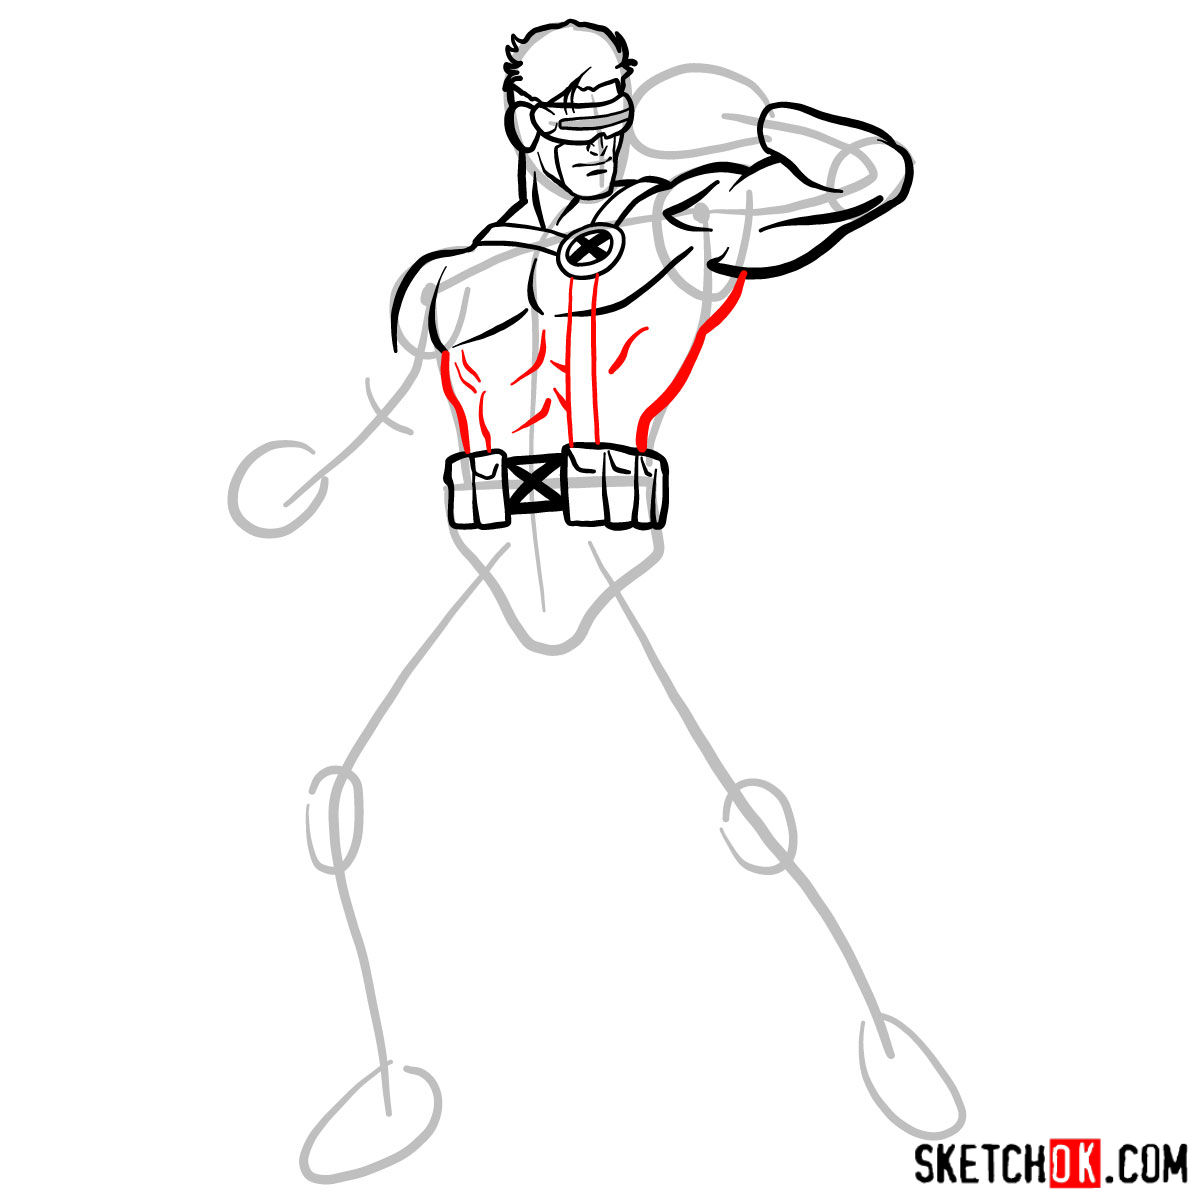 How to draw Cyclops from X-Men - step 10